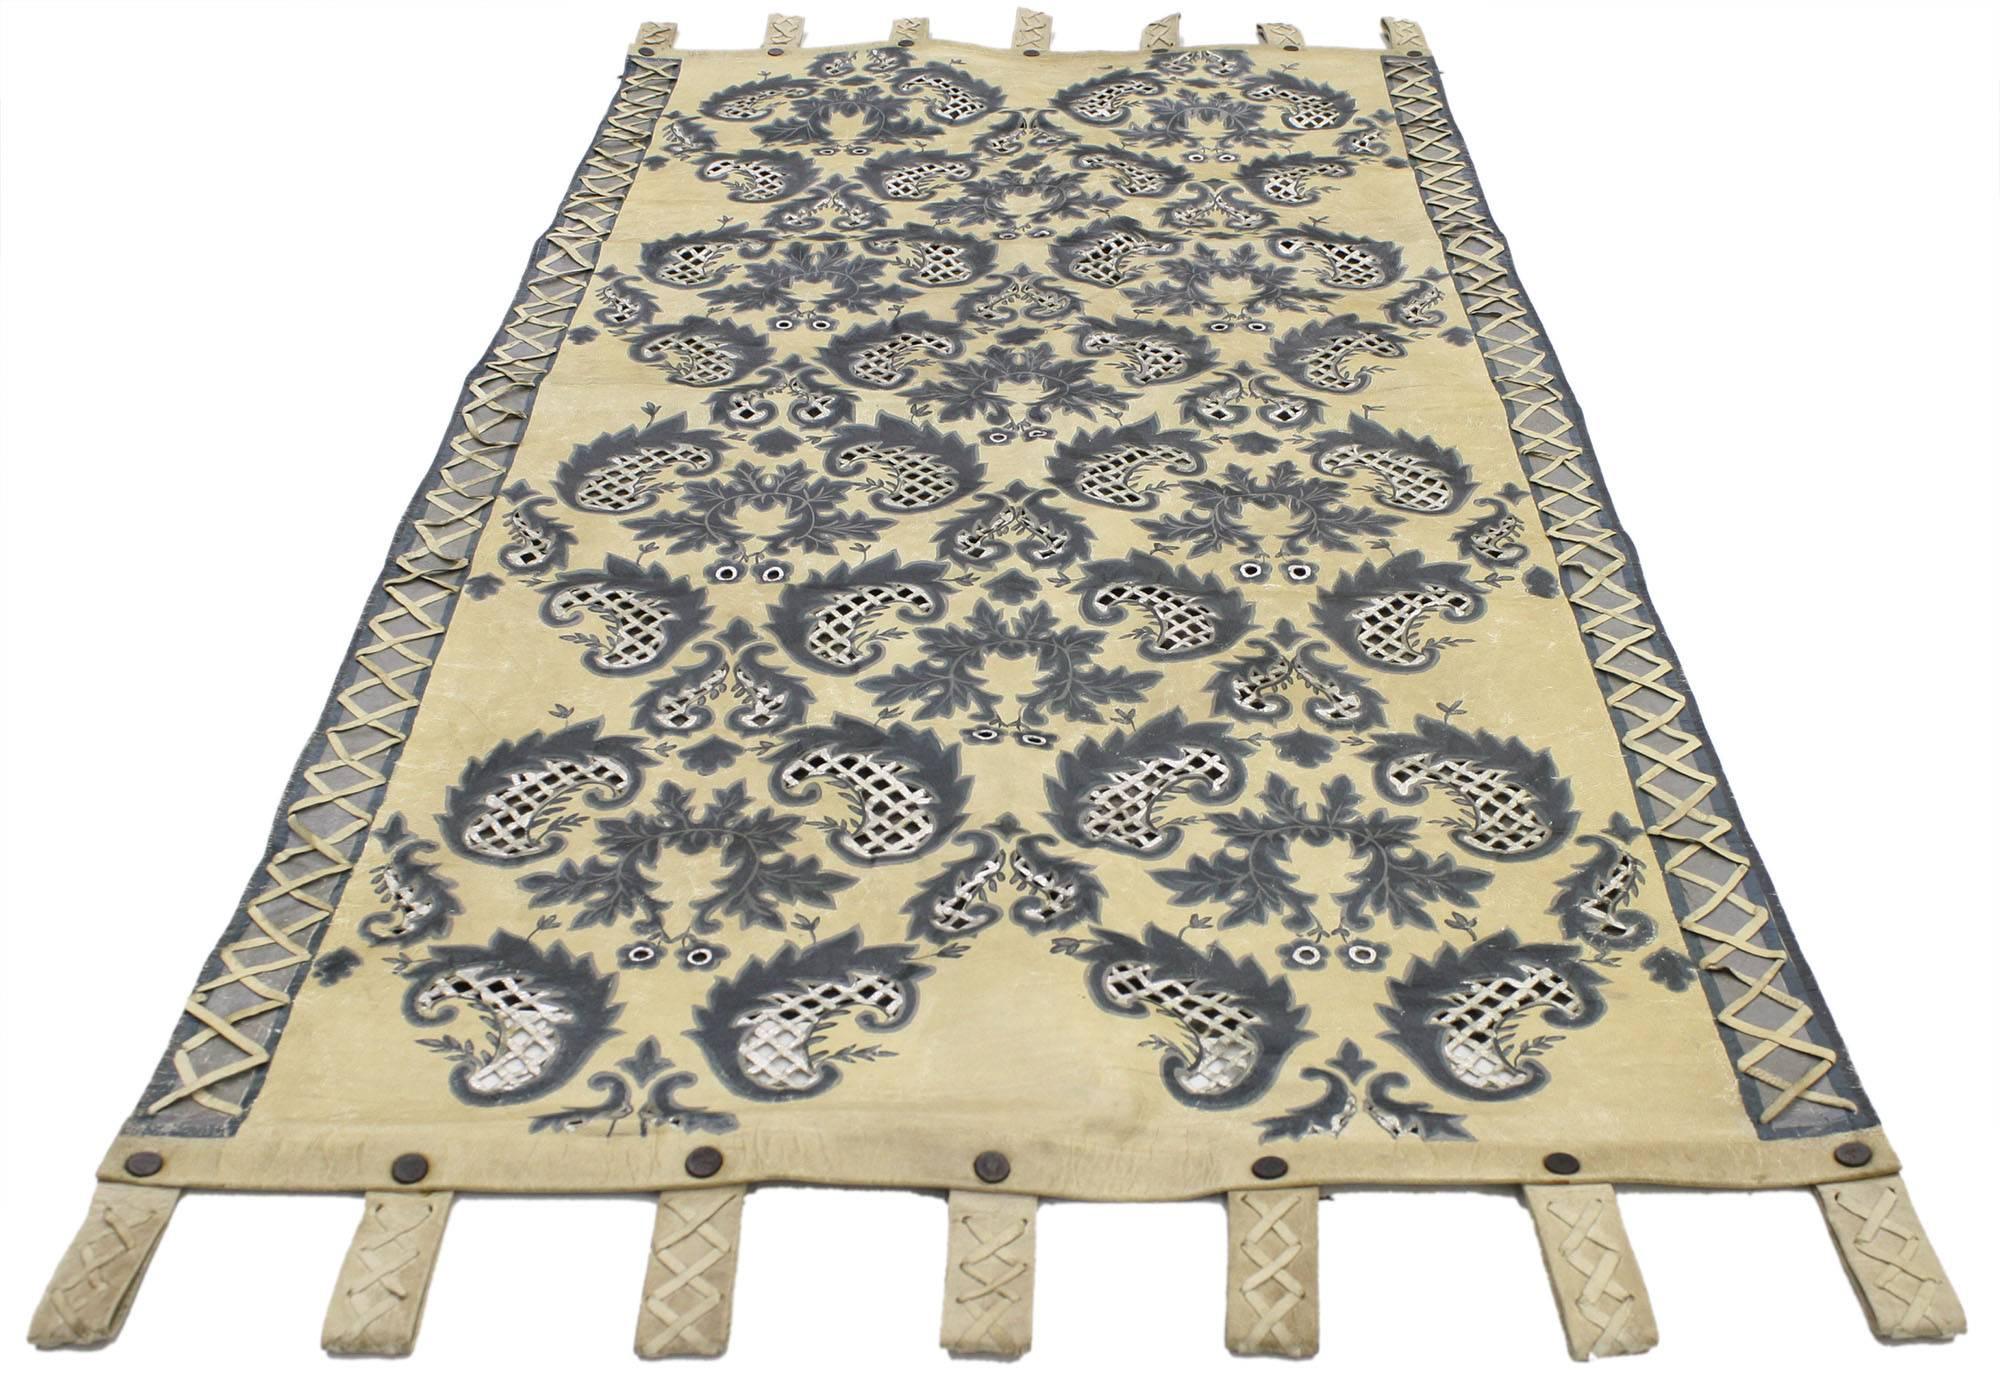 76894, vintage Indian leather tapestry wall hanging with William and Mary style. This vintage leather tapestry beautifully highlights an all-over paisley pattern of boteh motifs and acanthus leaves. The paisley boteh motifs feature a diamond lattice